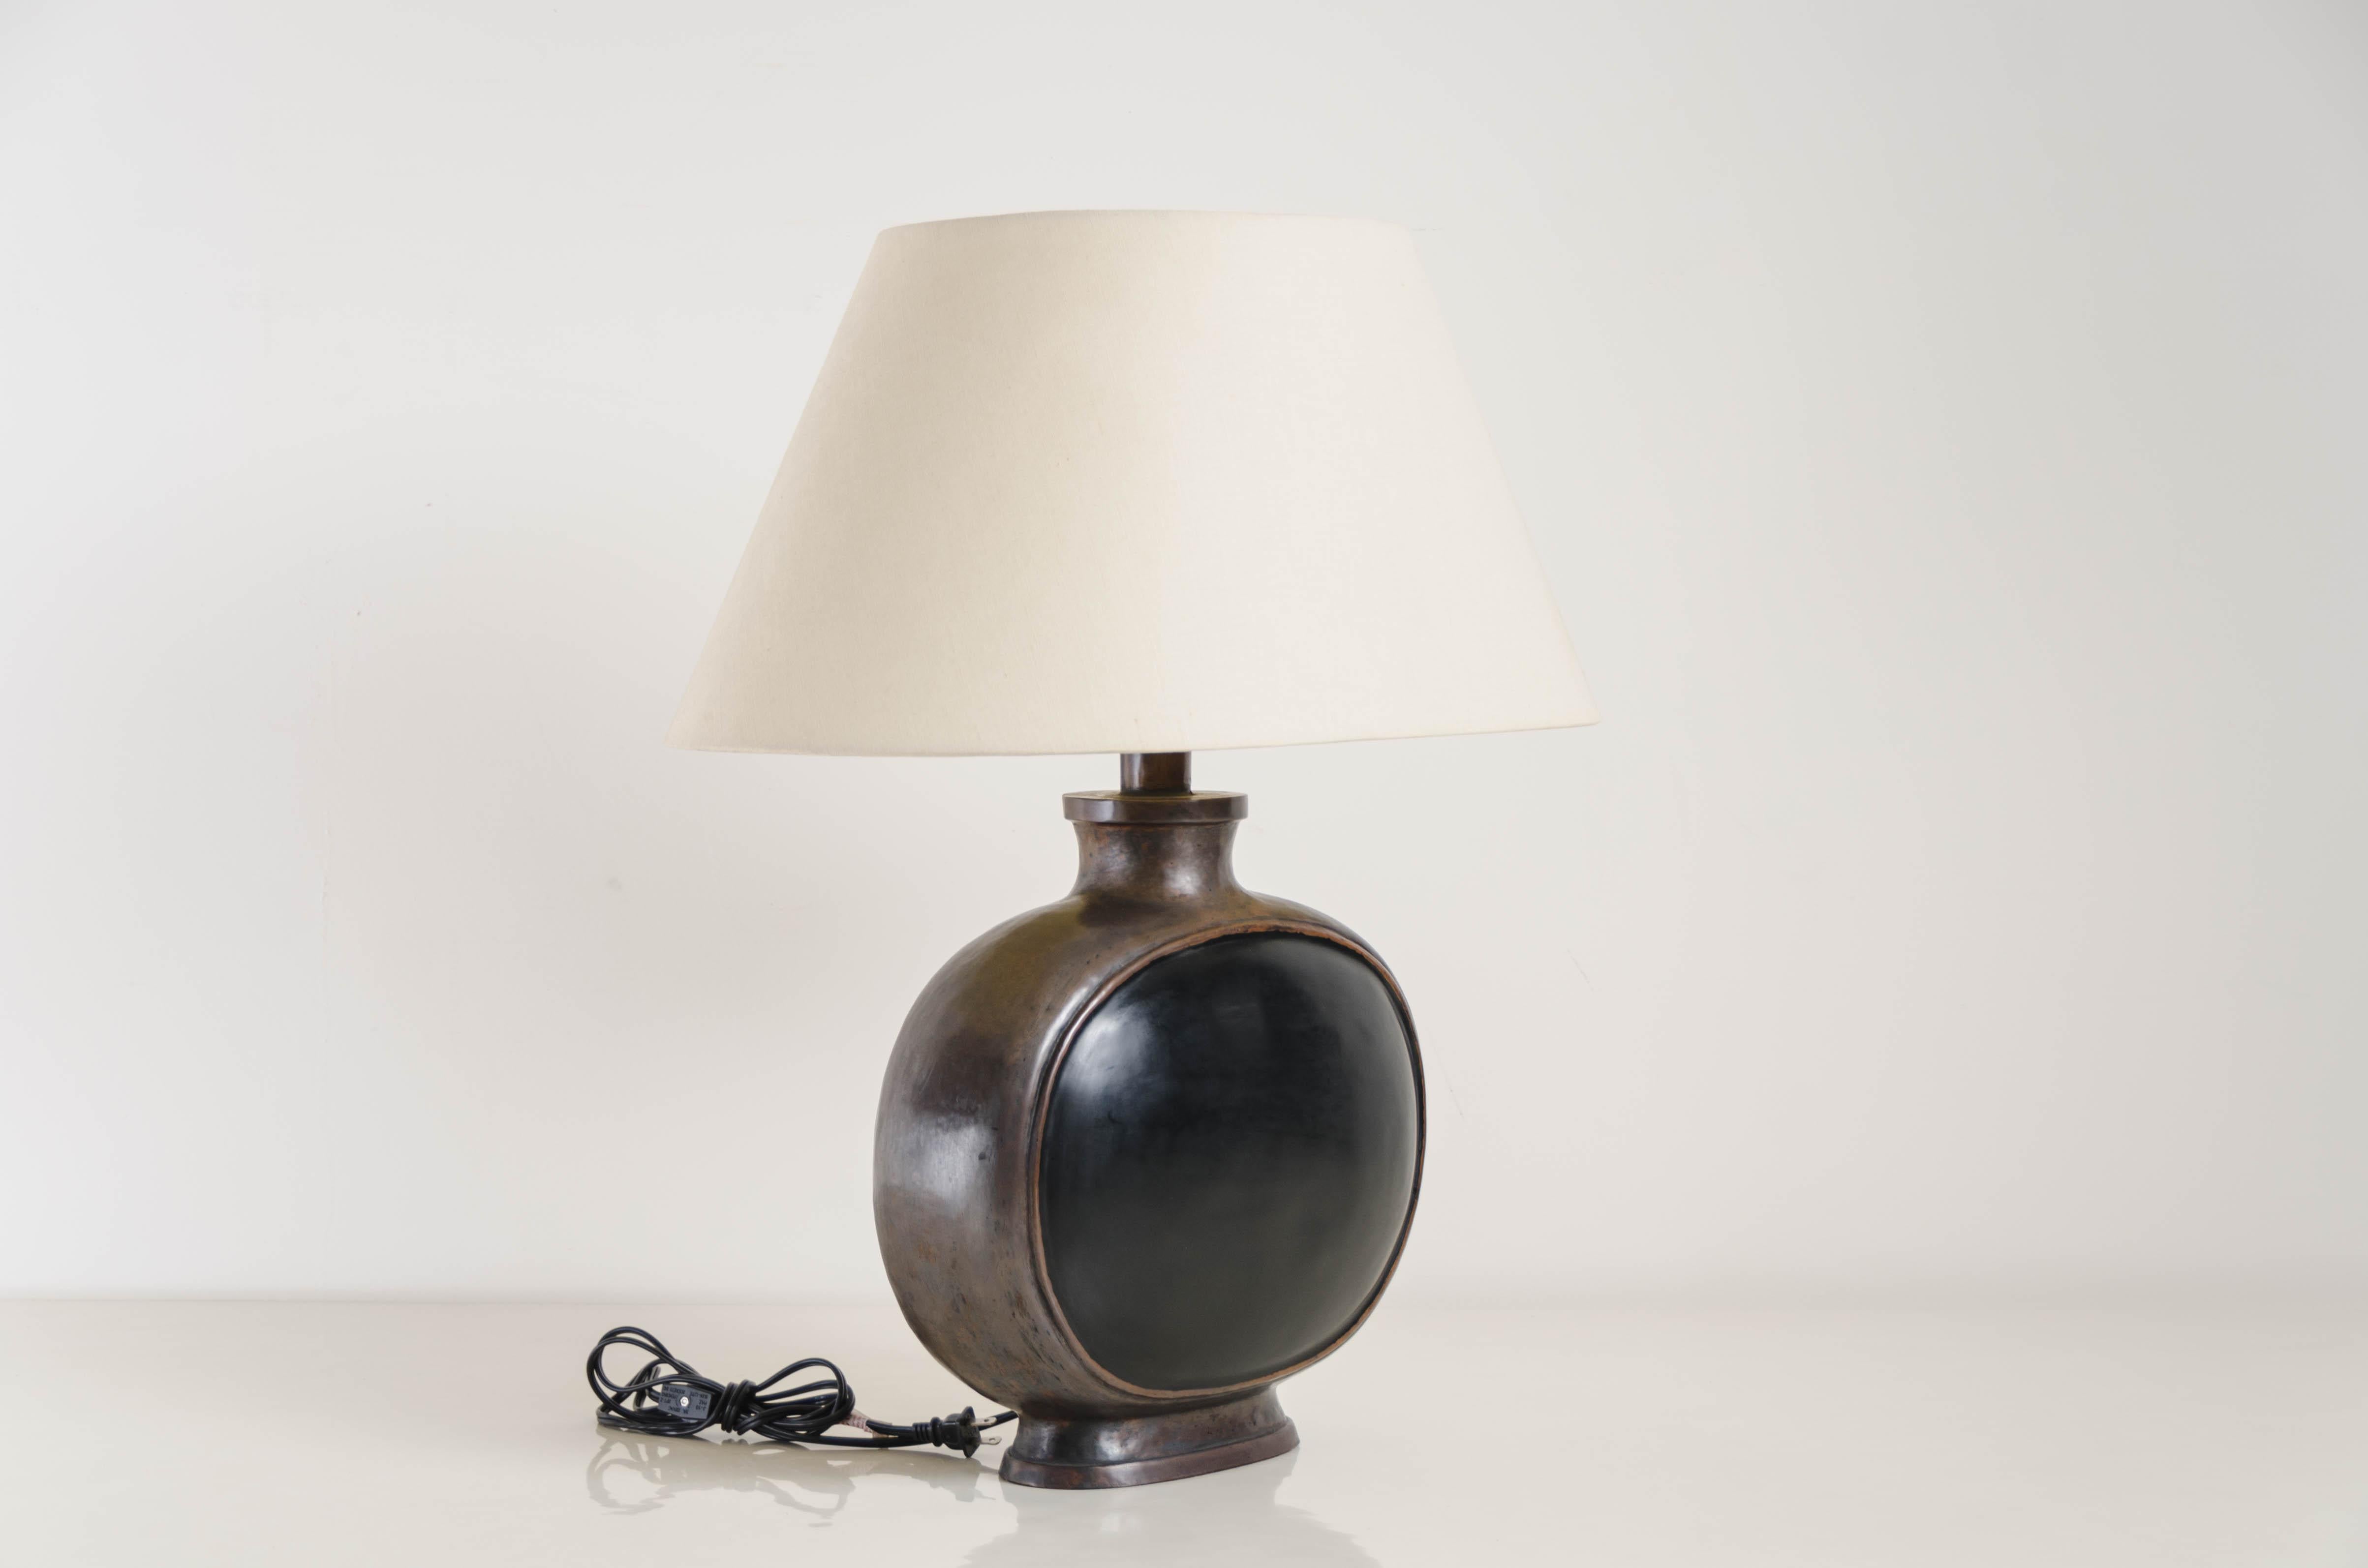 Bian Hu table lamp
Black lacquer
Antique copper
Hand respoussé
Silk shade
Handmade

Respoussé is the traditional art of hand-hammering decorative relief onto sheet metal. The technique originated circa 800 BC between Asia and Europe and in Chinese